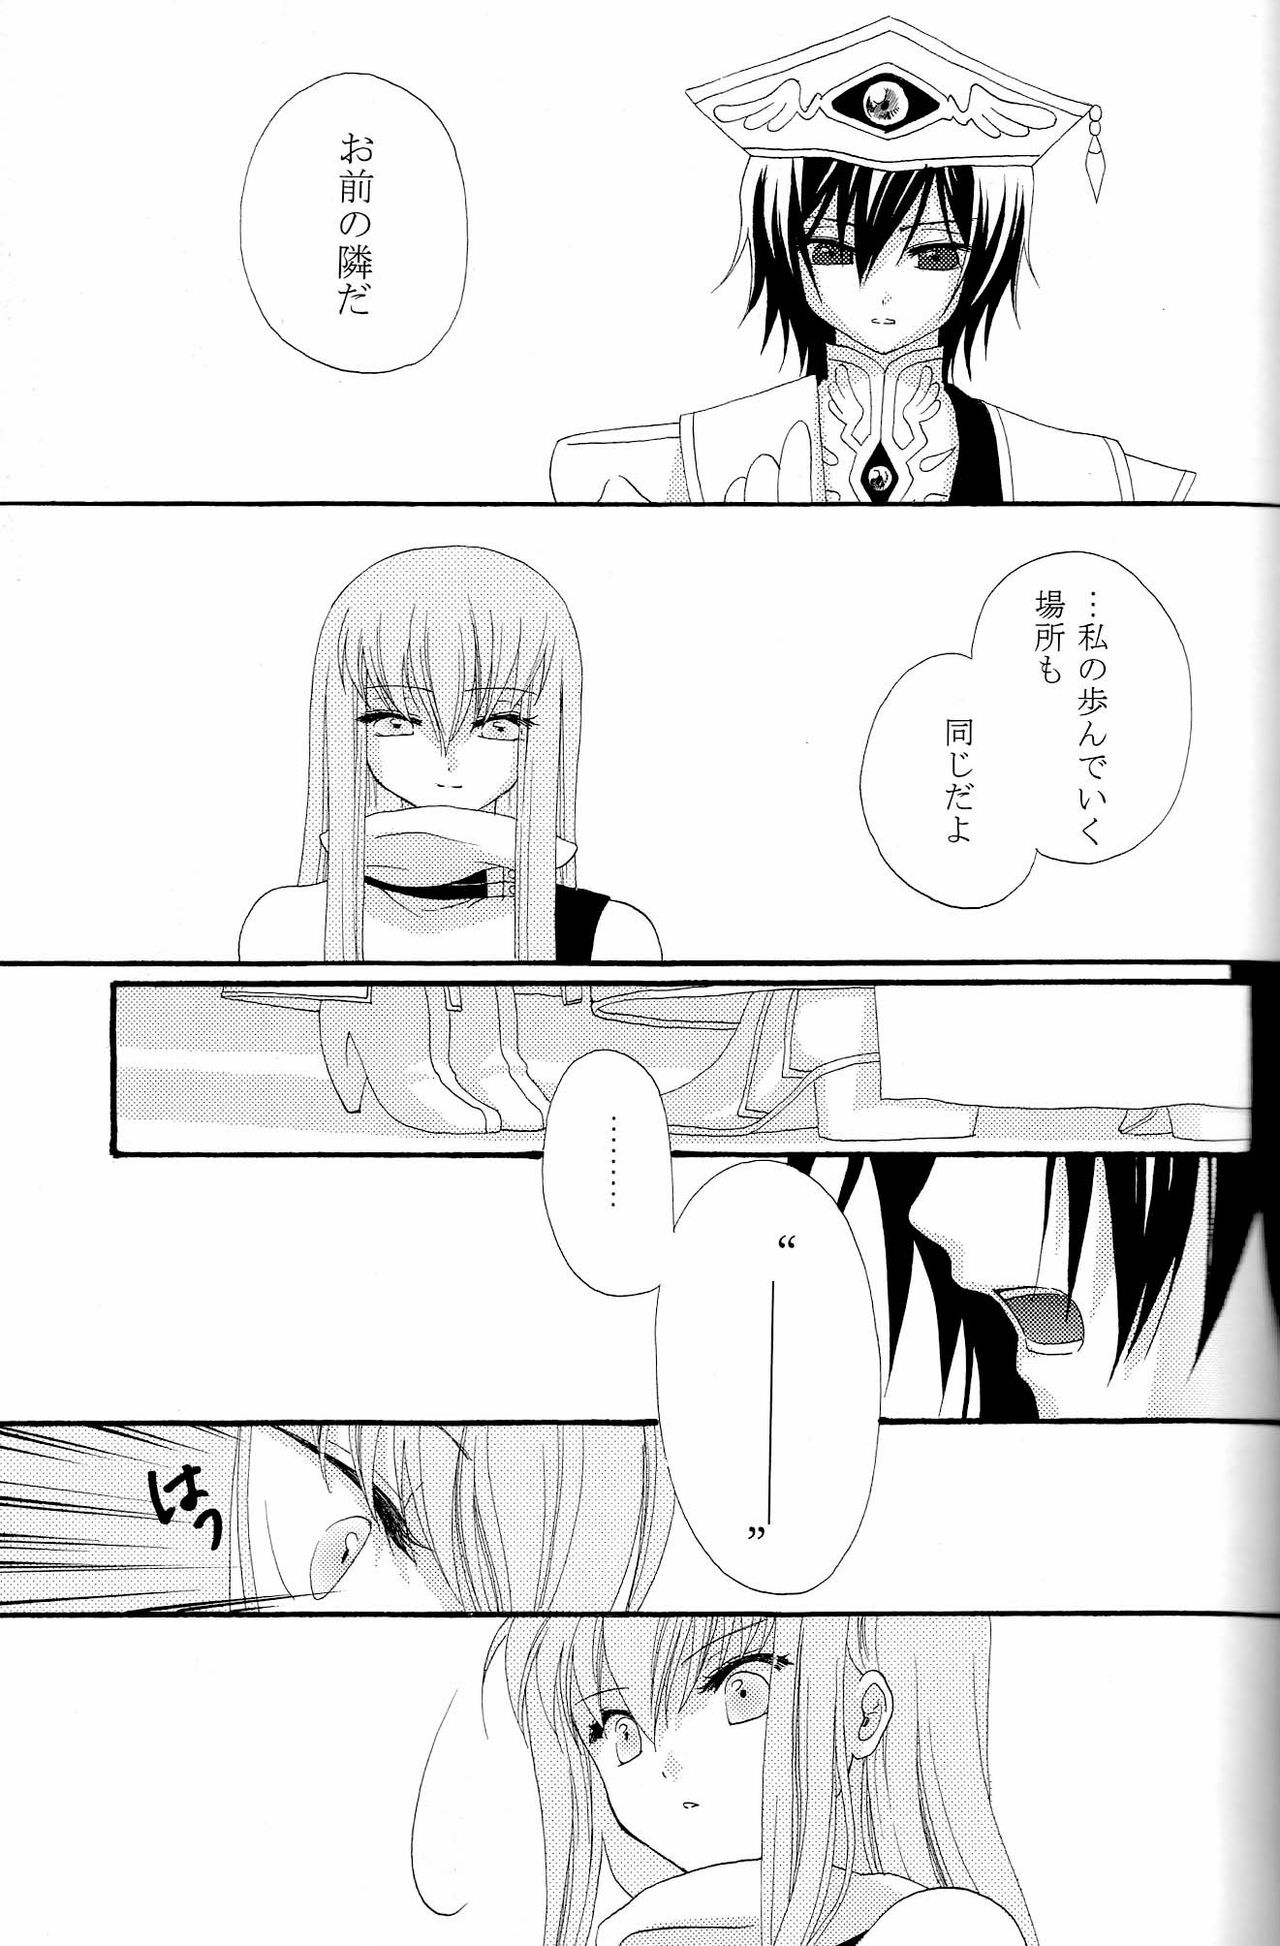 [APRICOT TEA] The last love letter presented to my dear only partner. (Code Geass) page 48 full